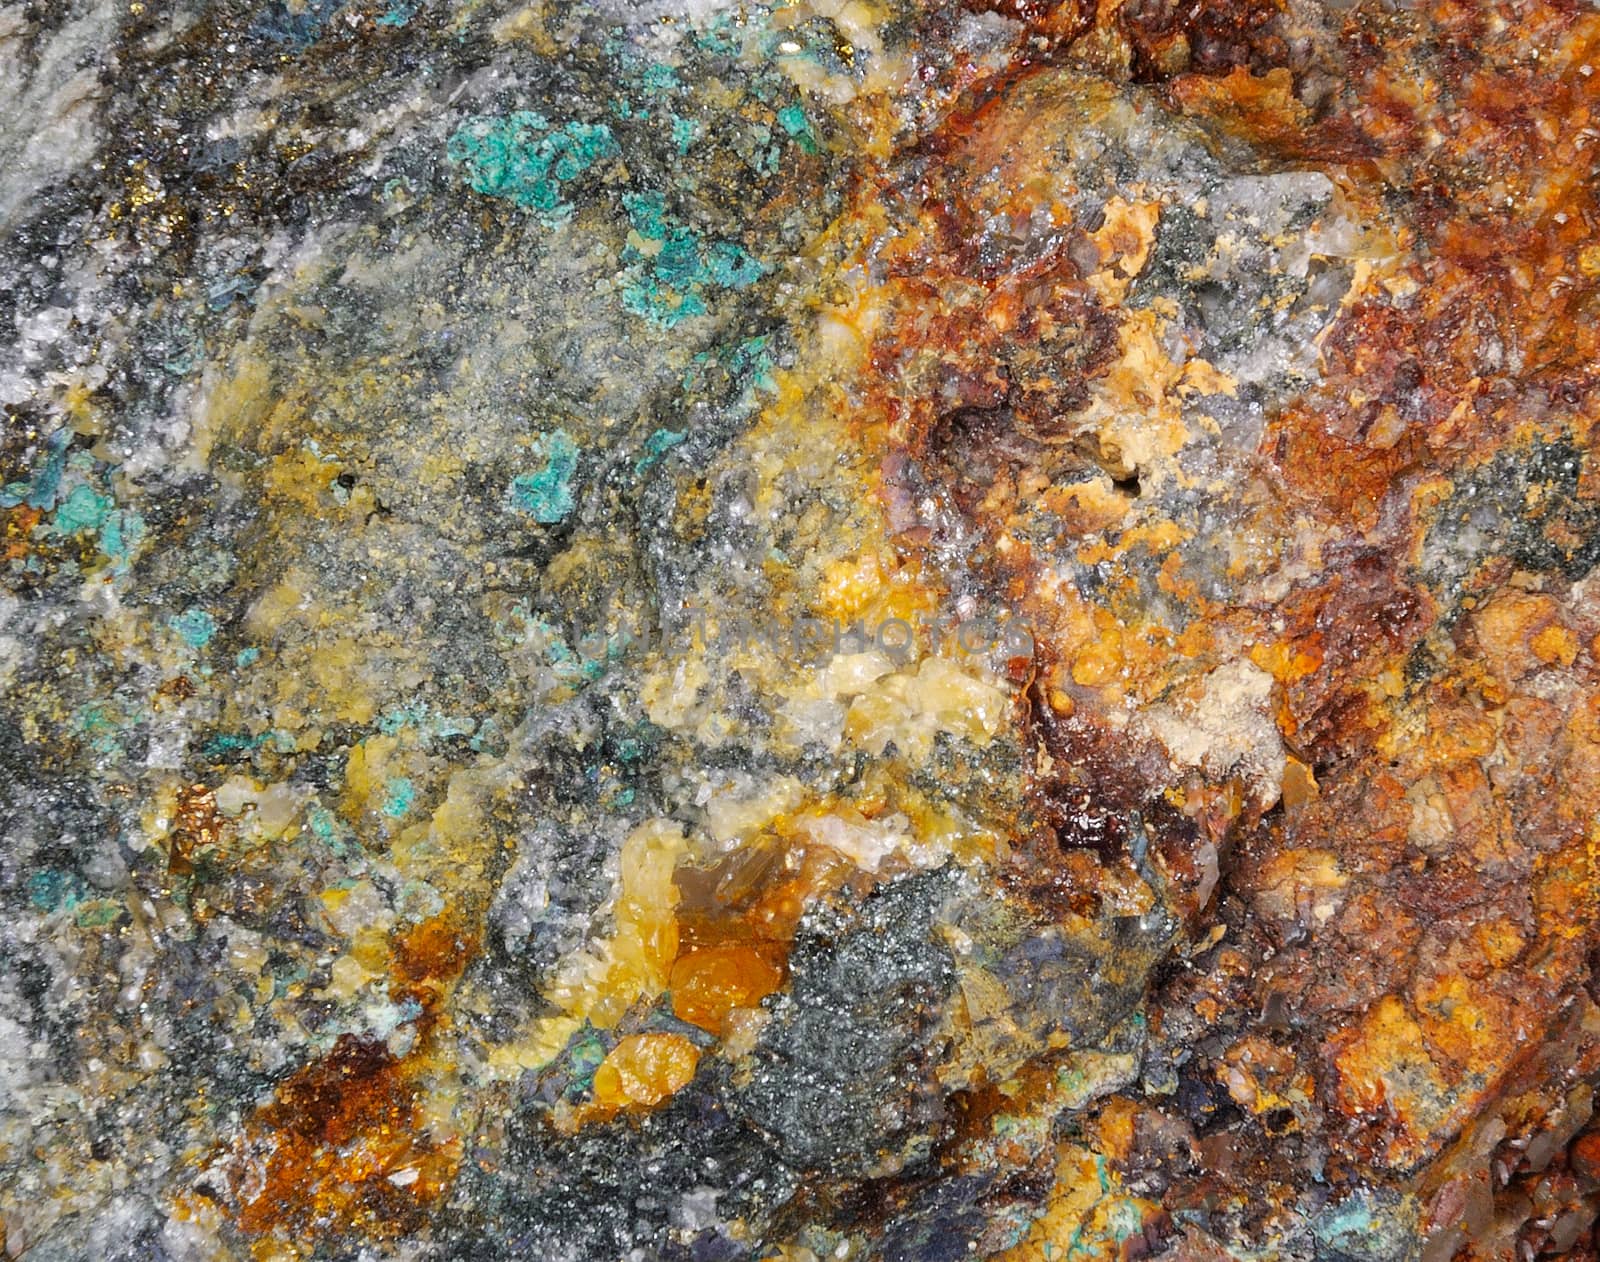 Abstract designs based on geological and other natural materials, appropriate for backgrounds and marketing.